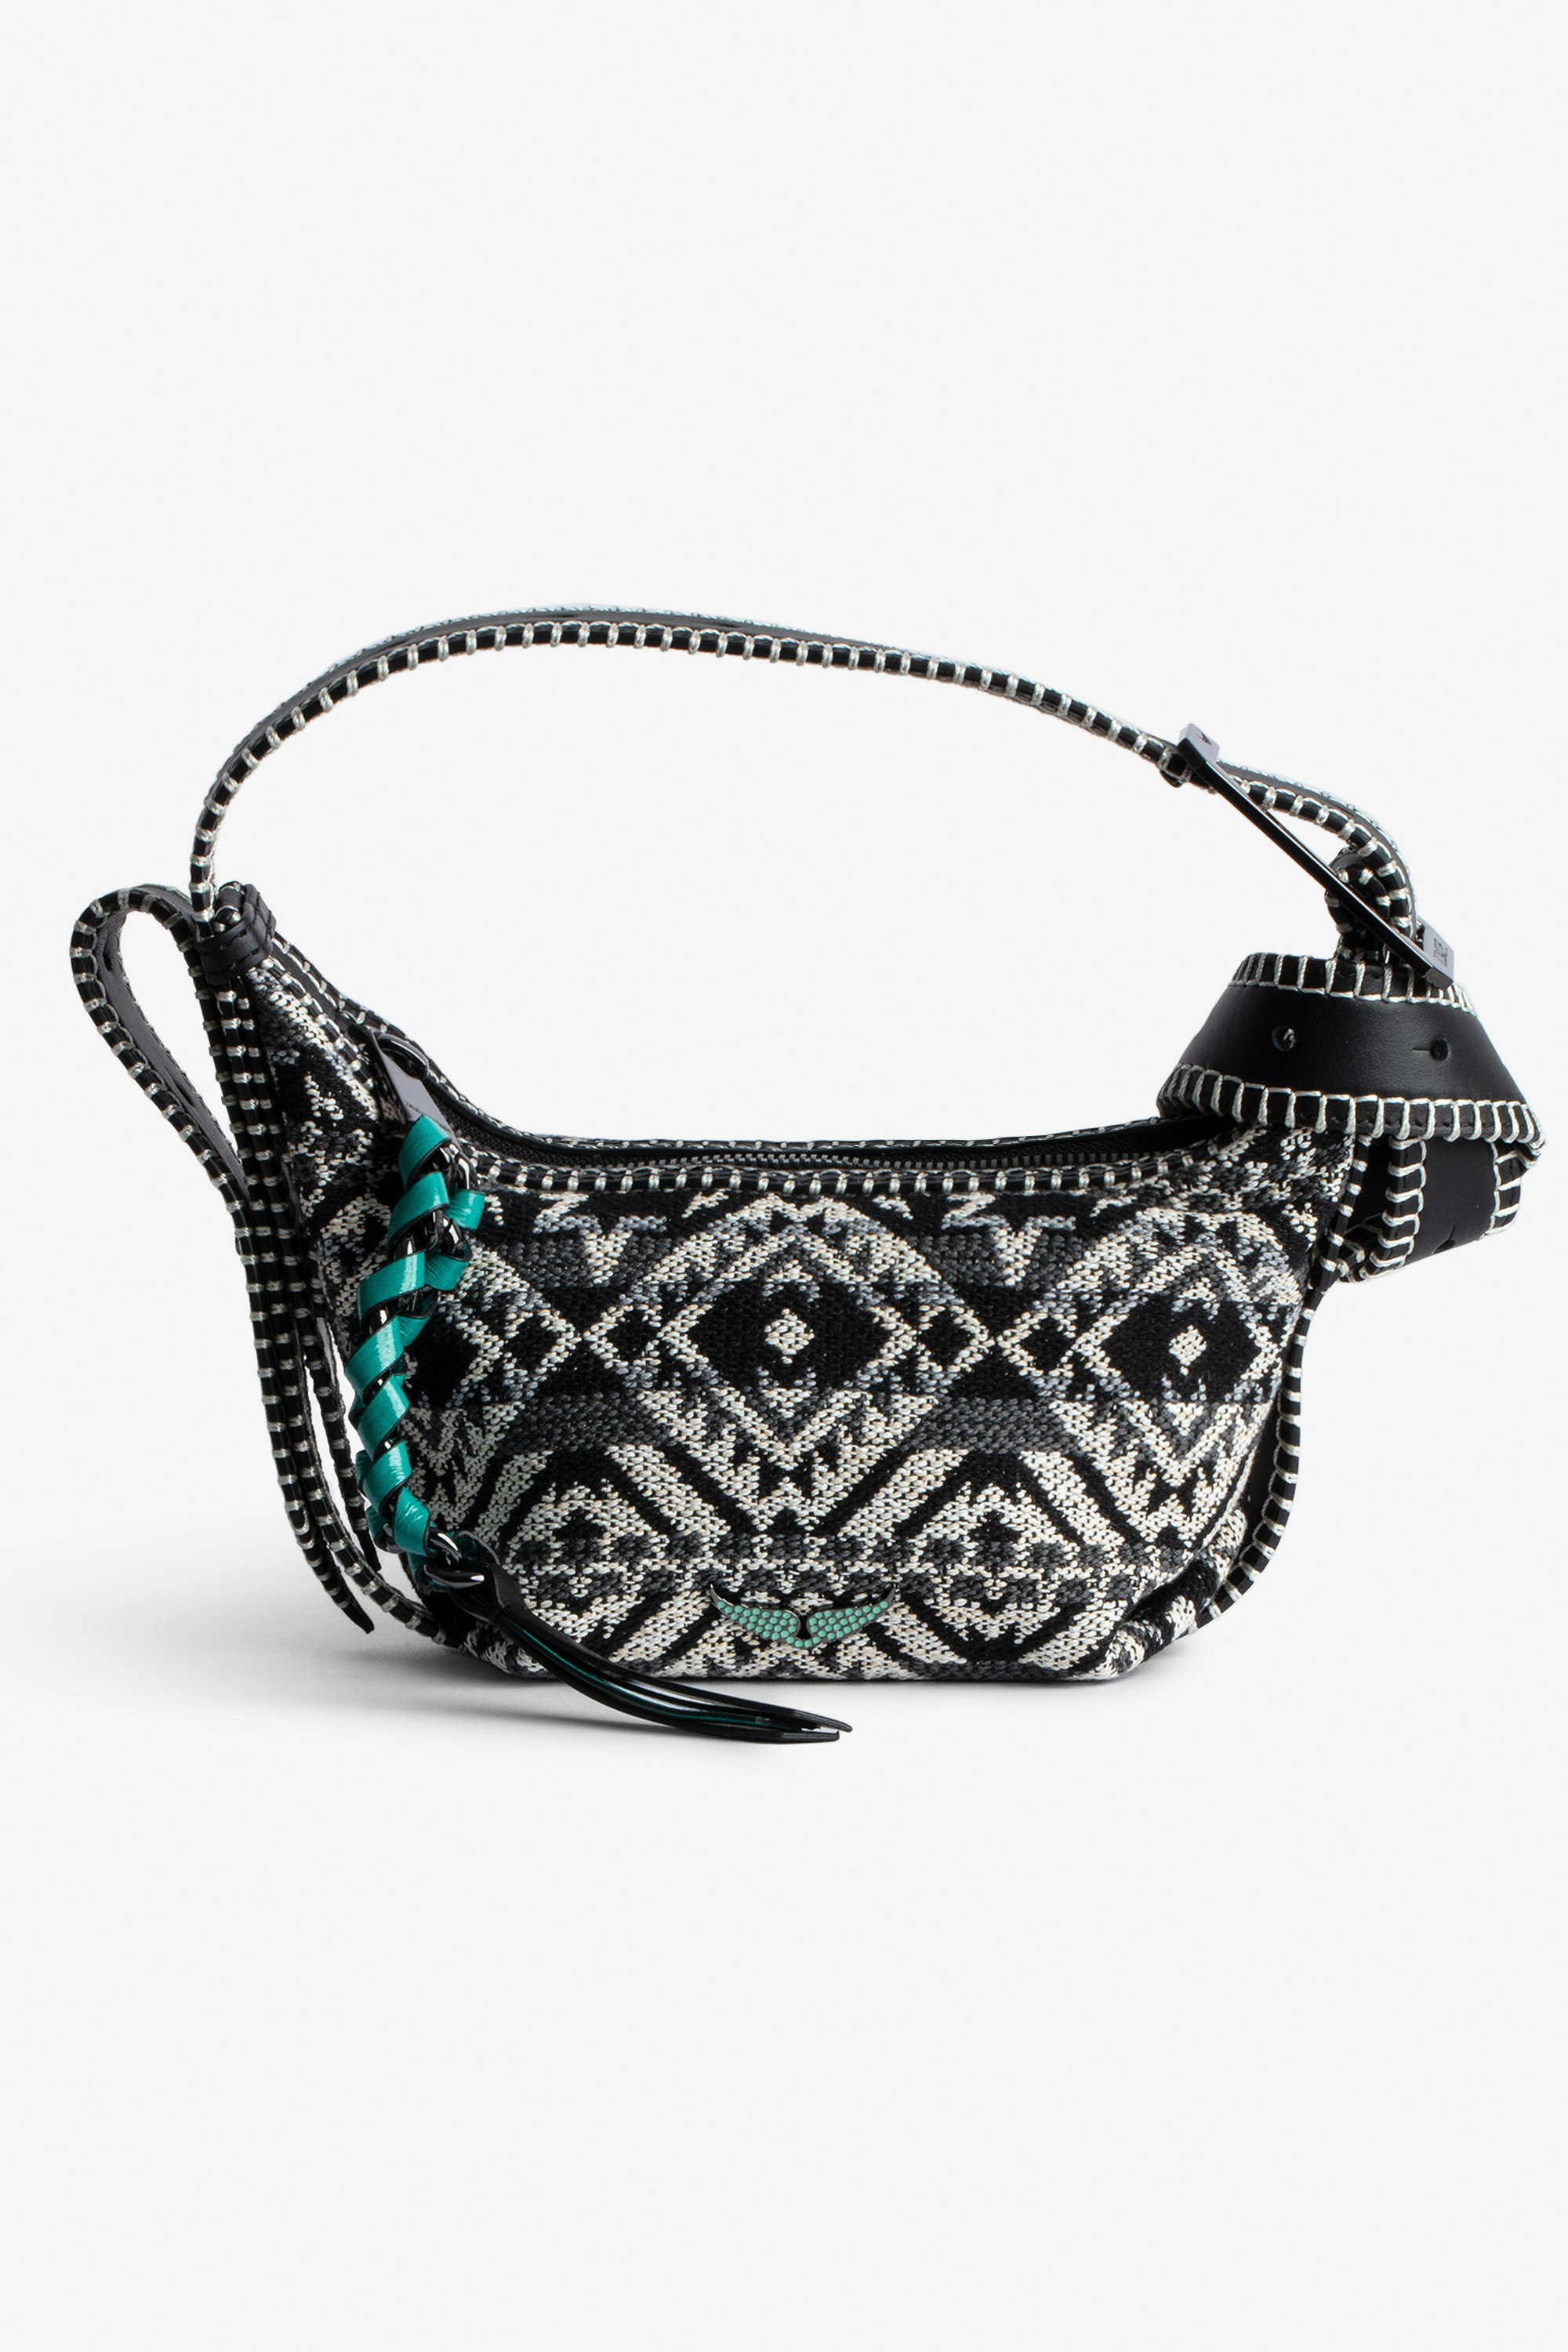 Le Cecilia XS Folk Jacquard Bag Women’s small bag in black Jacquard with contrasting folk motif, handle and C-shaped metal buckle